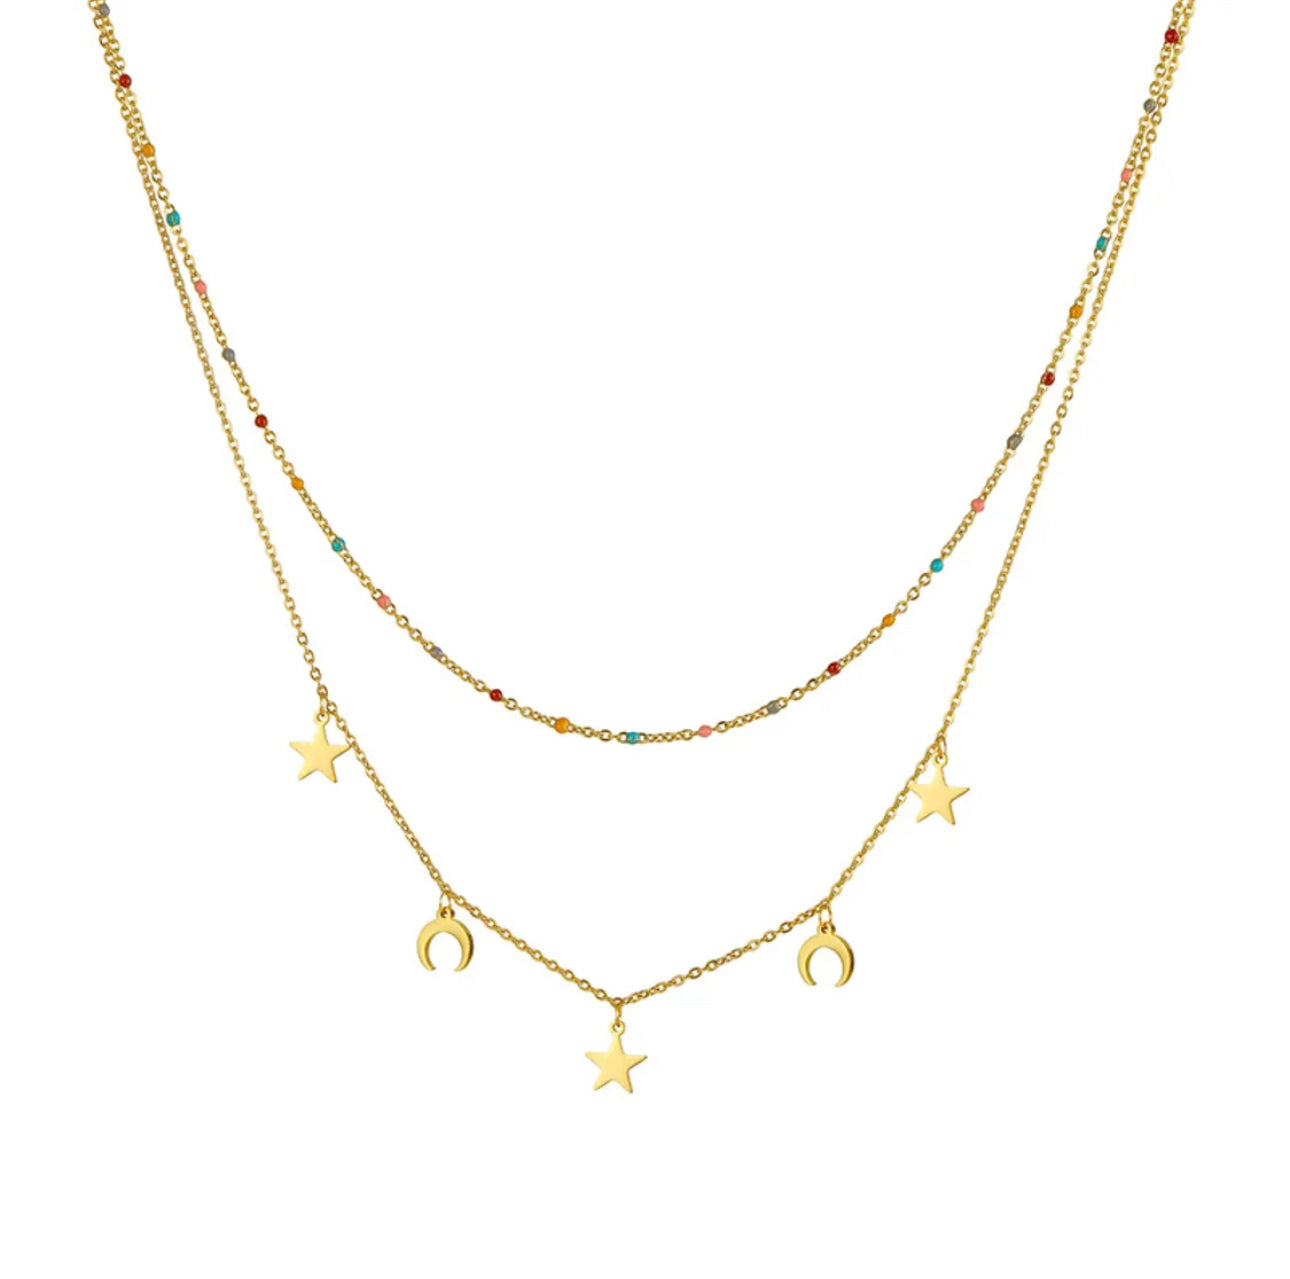 DOBLE necklace (colors) 18k Gold Filled/ doble Chain- non tarnish - stainless steel